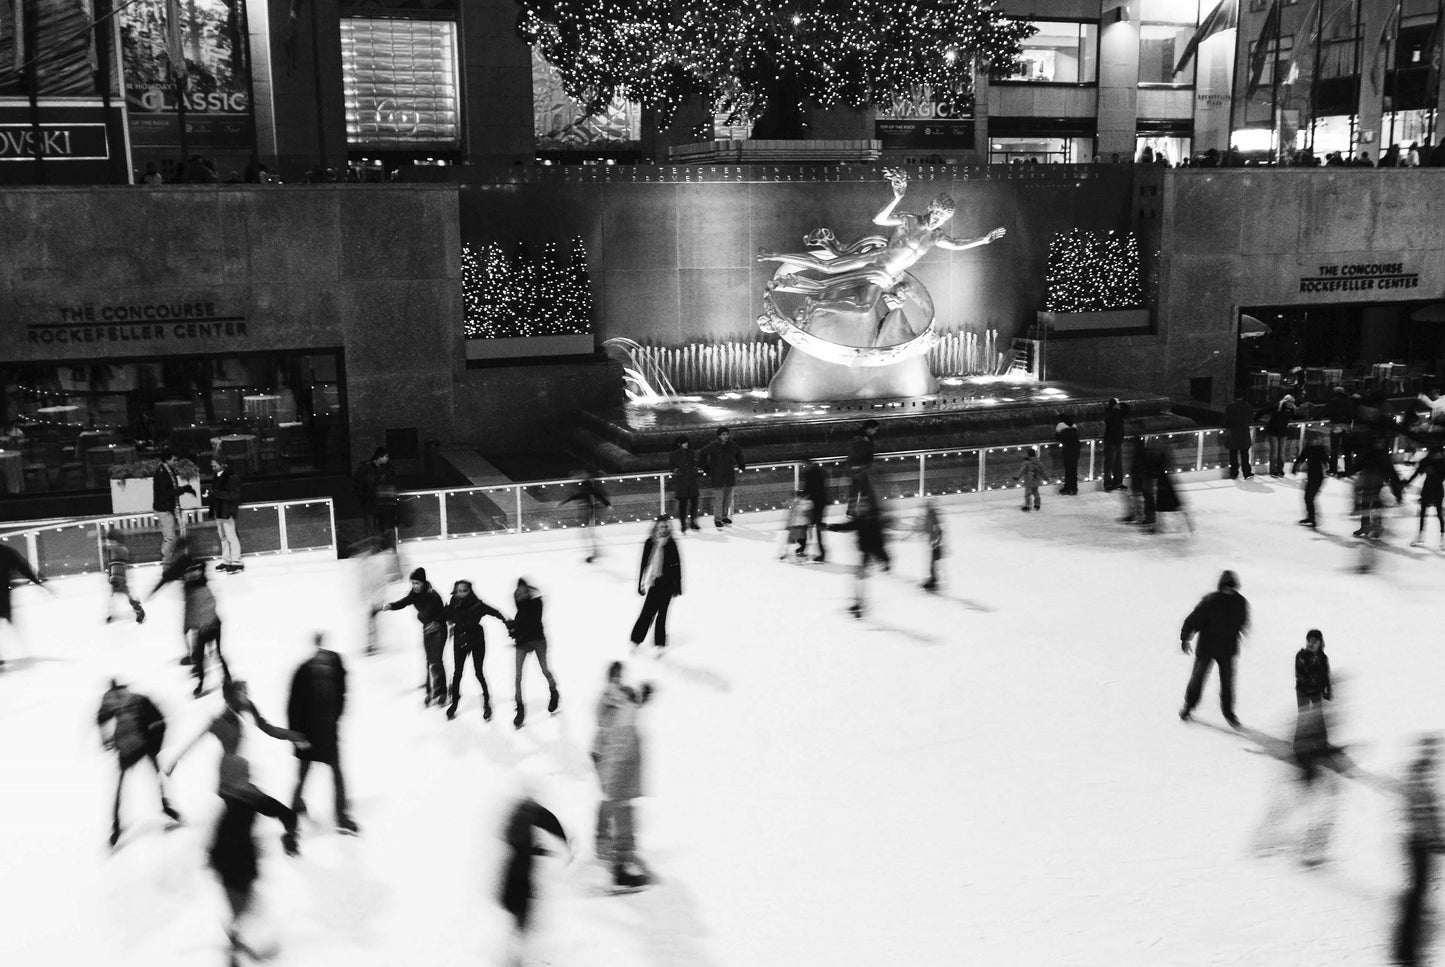 Alessandra Mattanza | IN THE VORTEX, Rockefeller Center, New York. Skaters in front of the Rockefeller Center, known far and wide as one of New York City's most iconic attractions. Available as a photographic print on acrylic glass,